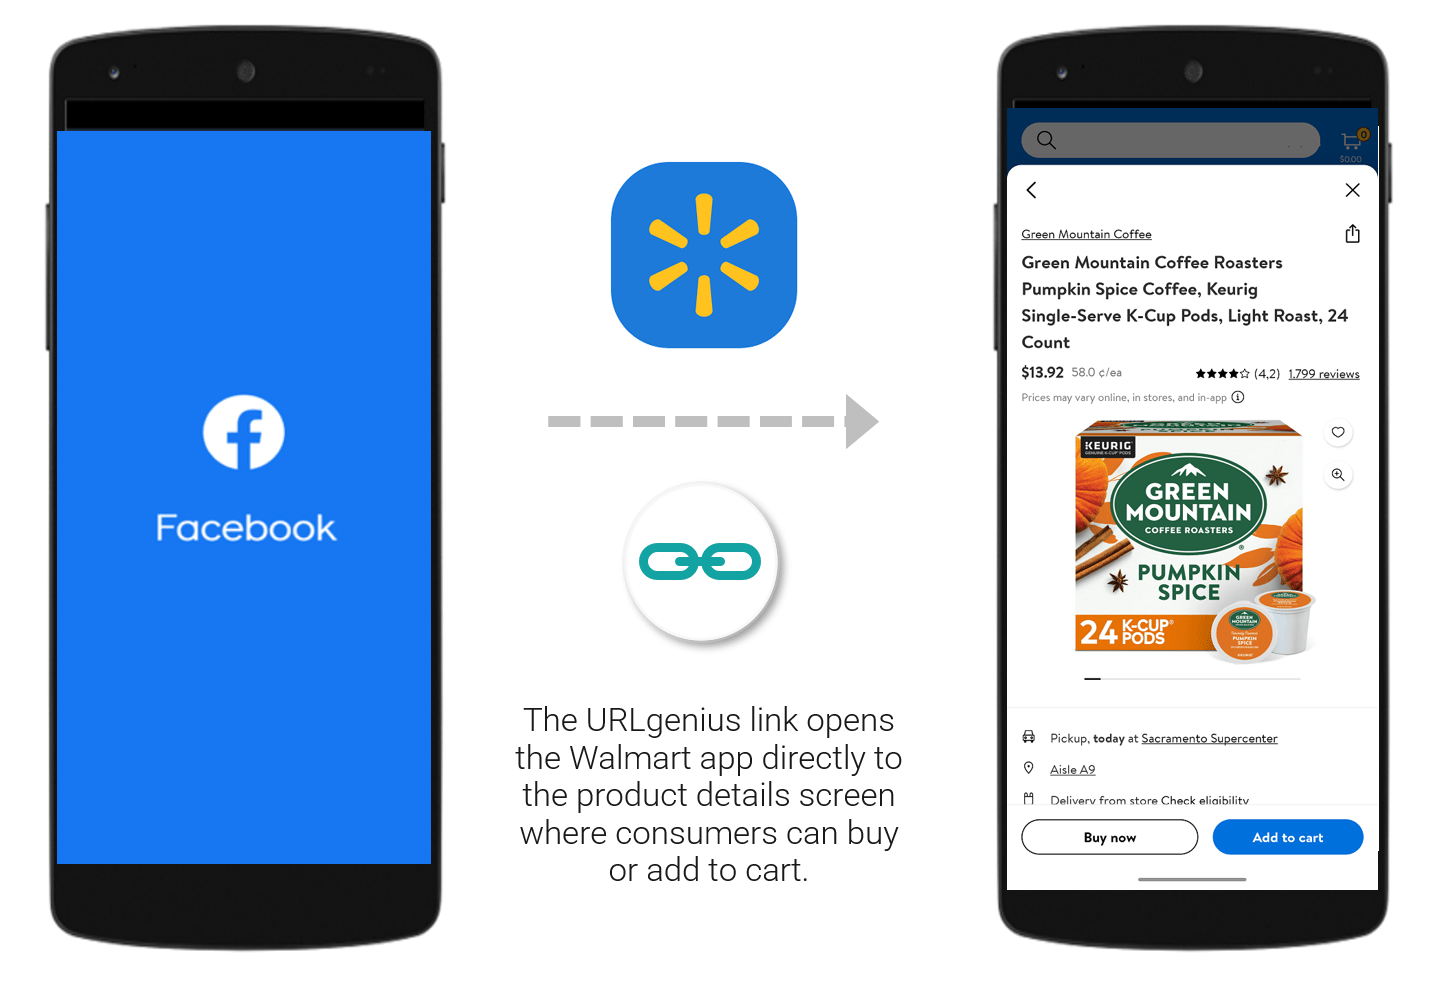 The URLgenius Walmart app deep link directly to the product details screen where consumers can buy or add to cart